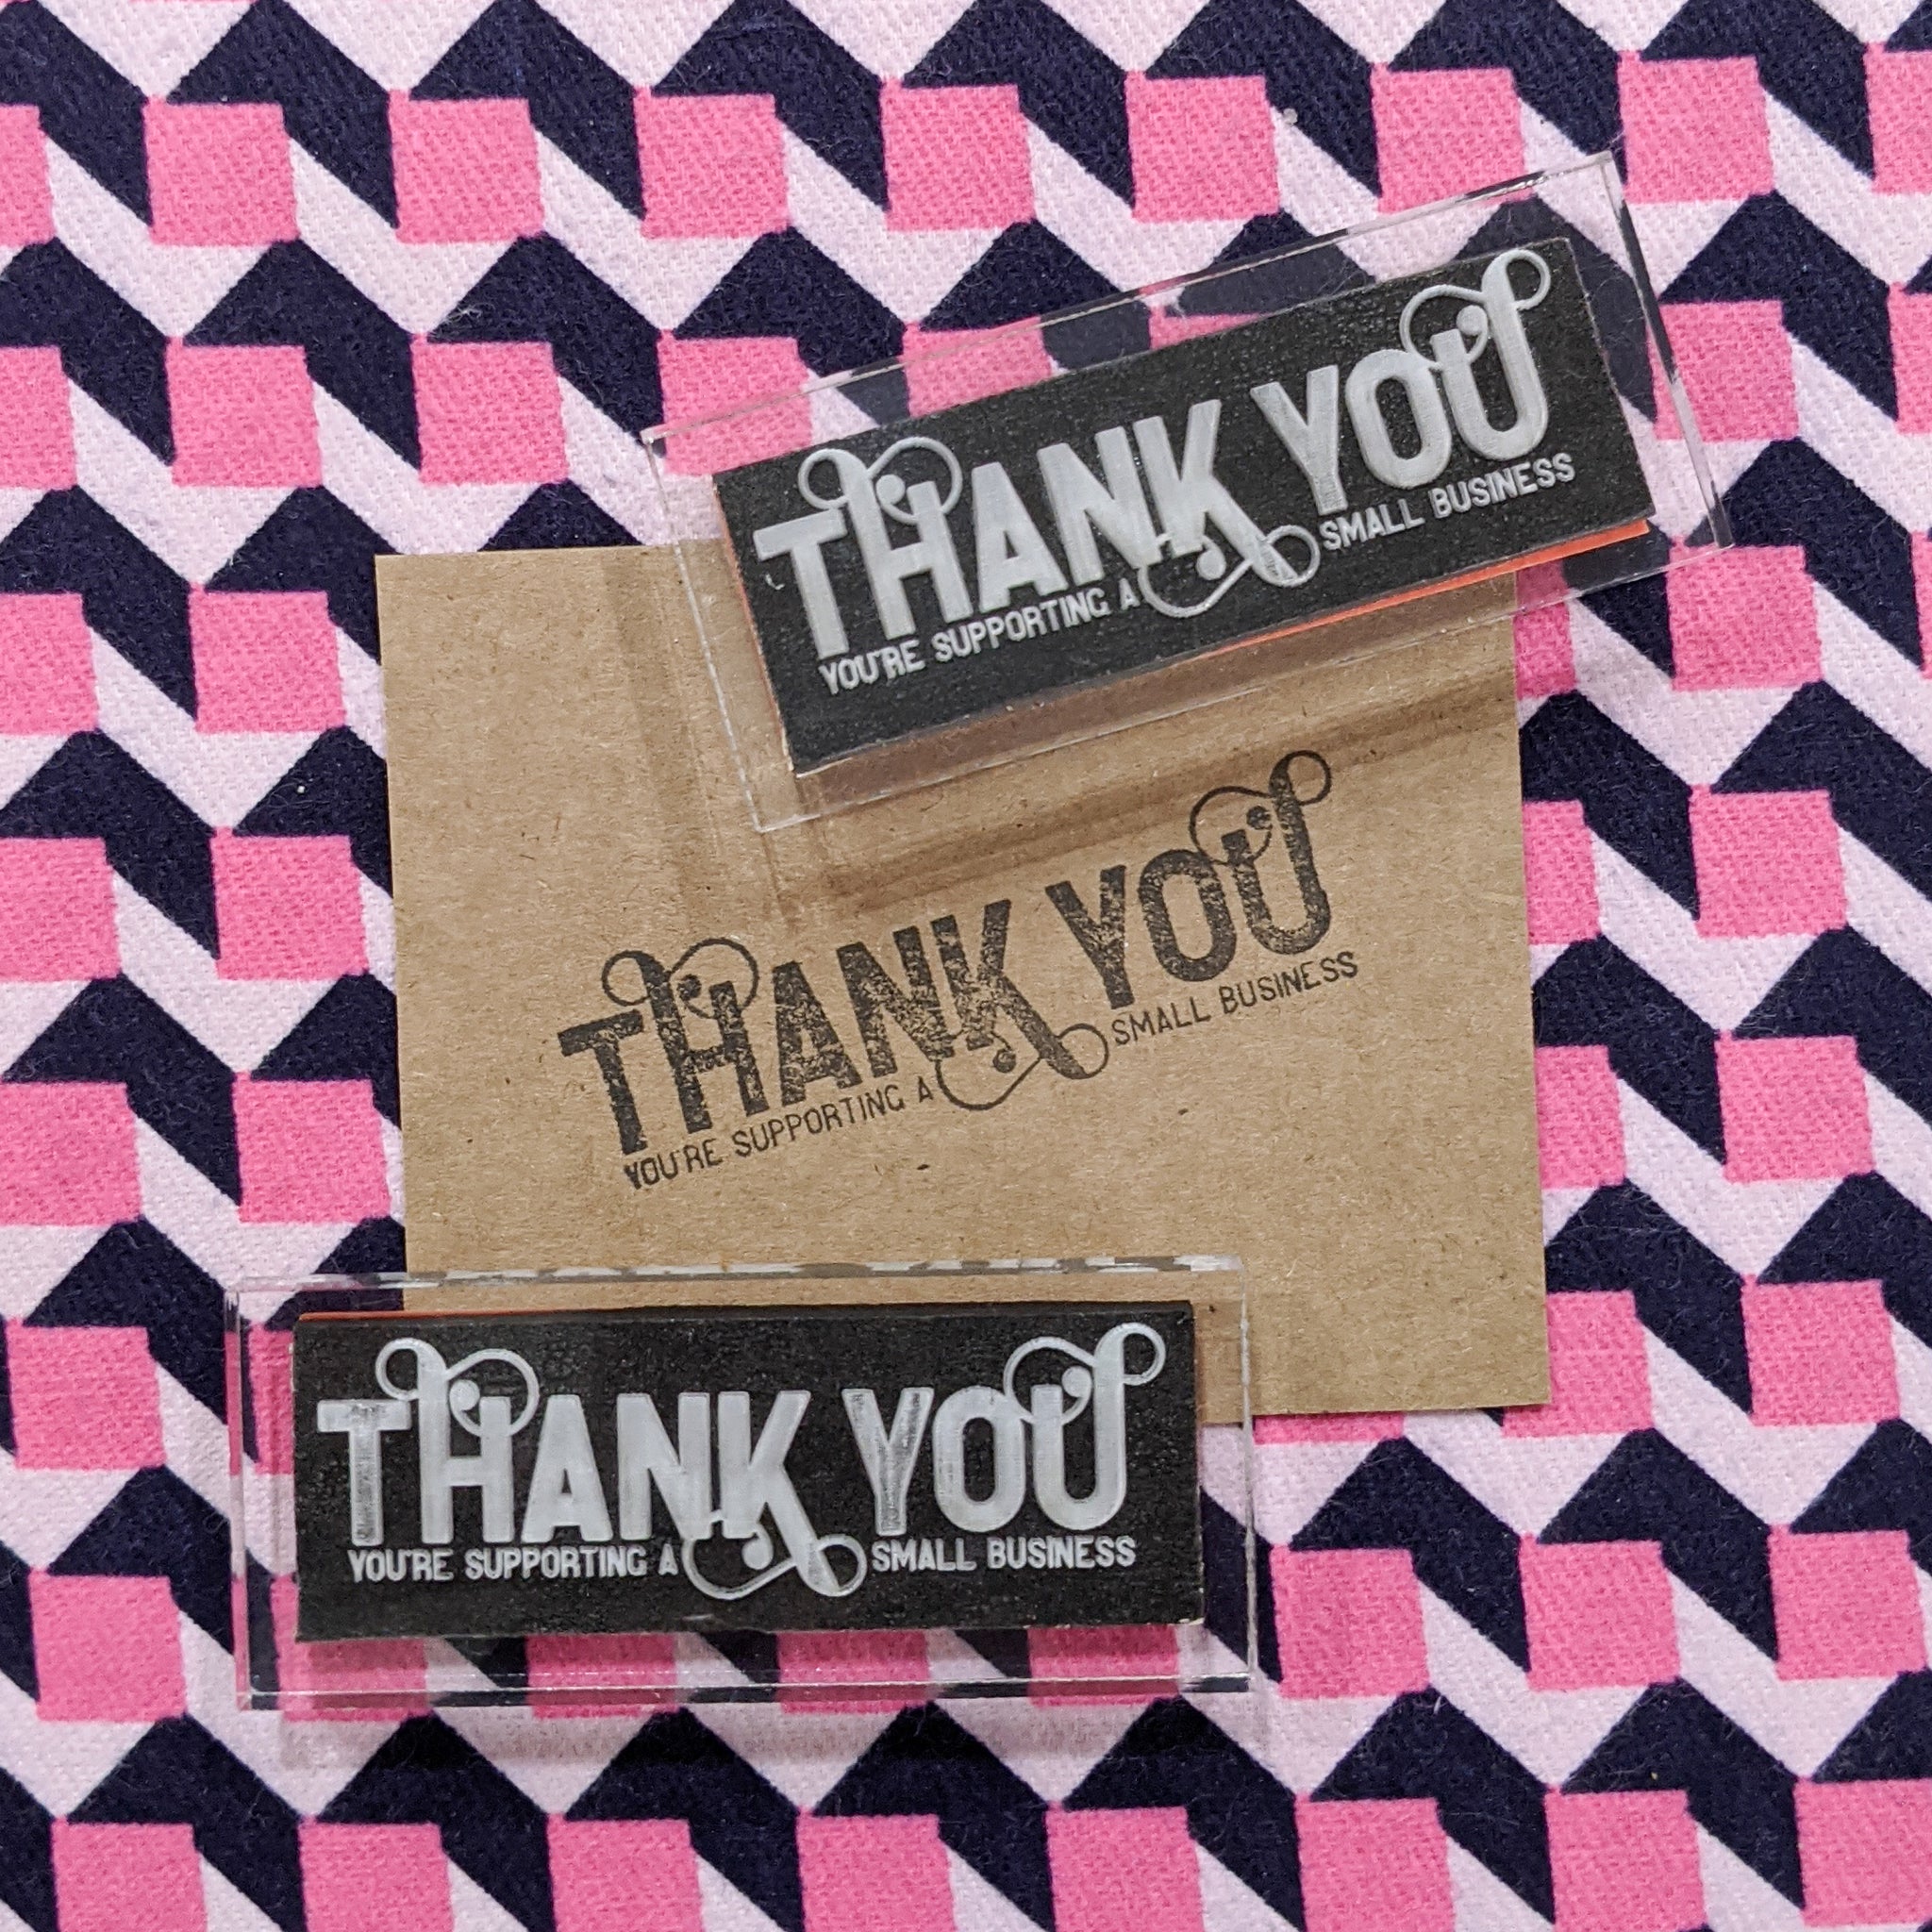 Thank You Small Business Rubber Stamp